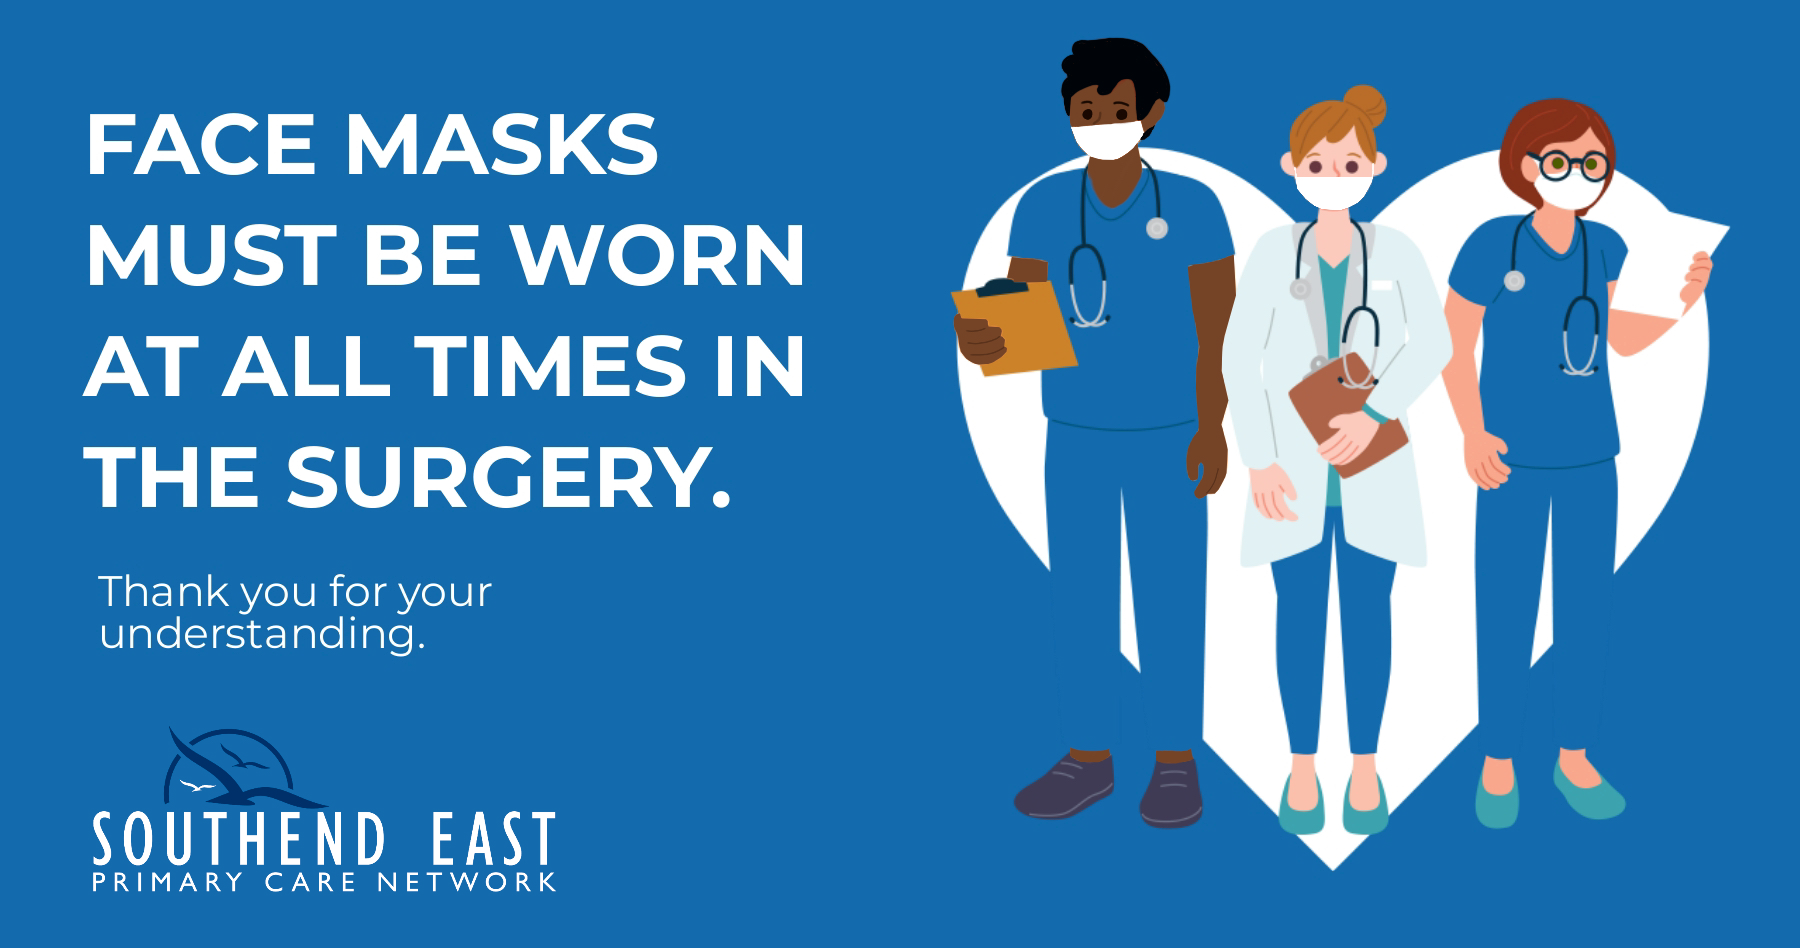 Face masks must be worn at all times in the surgery. Thank you for your understanding